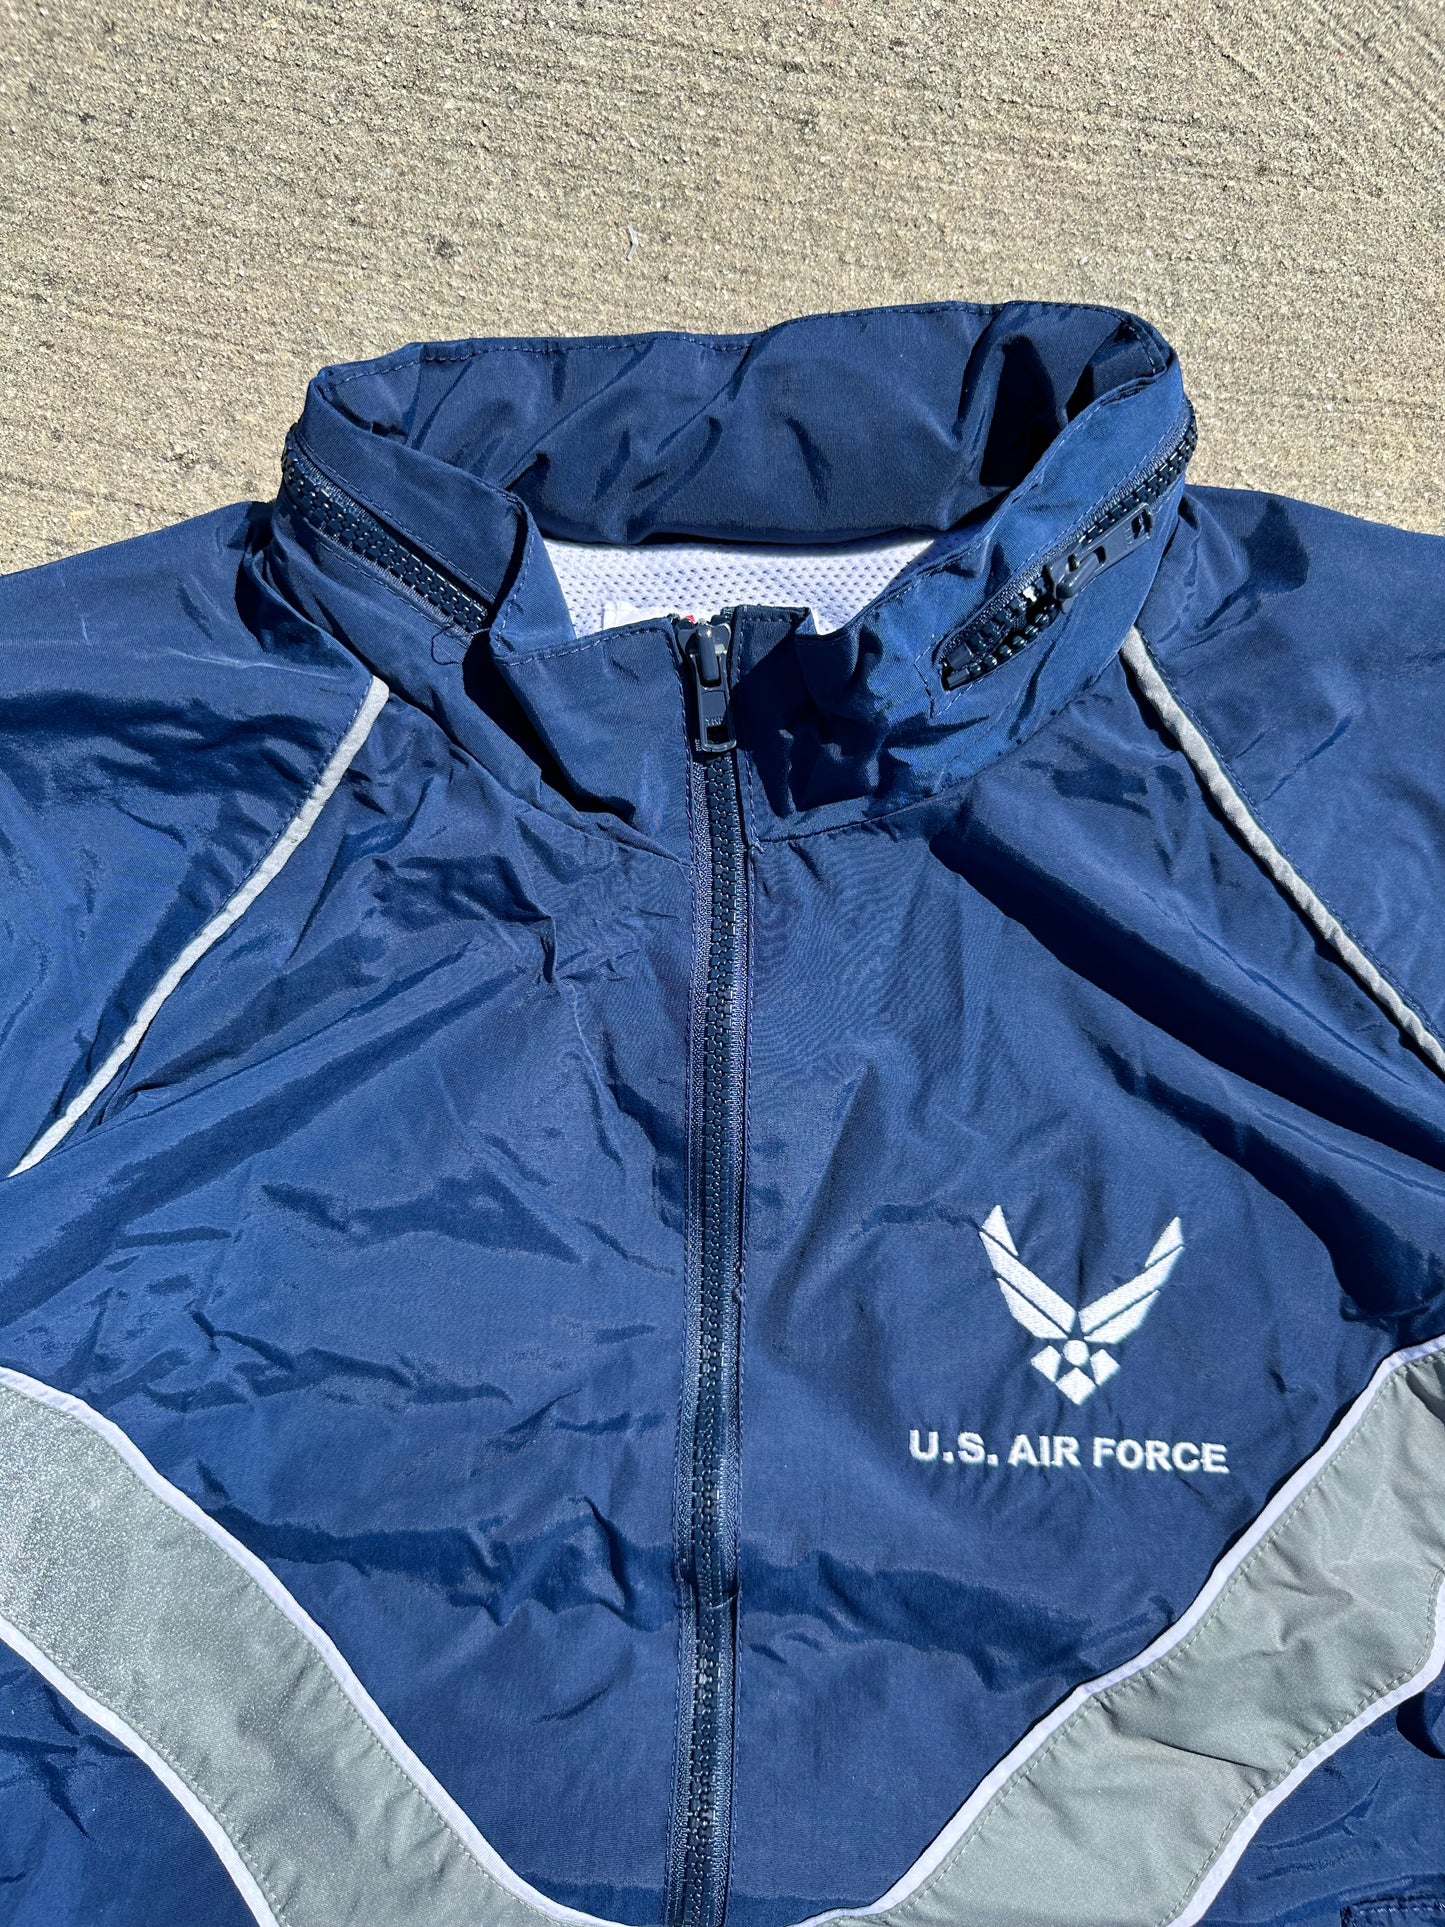 UNITED STATES AIR FORCE FULL-ZIP JACKET — M